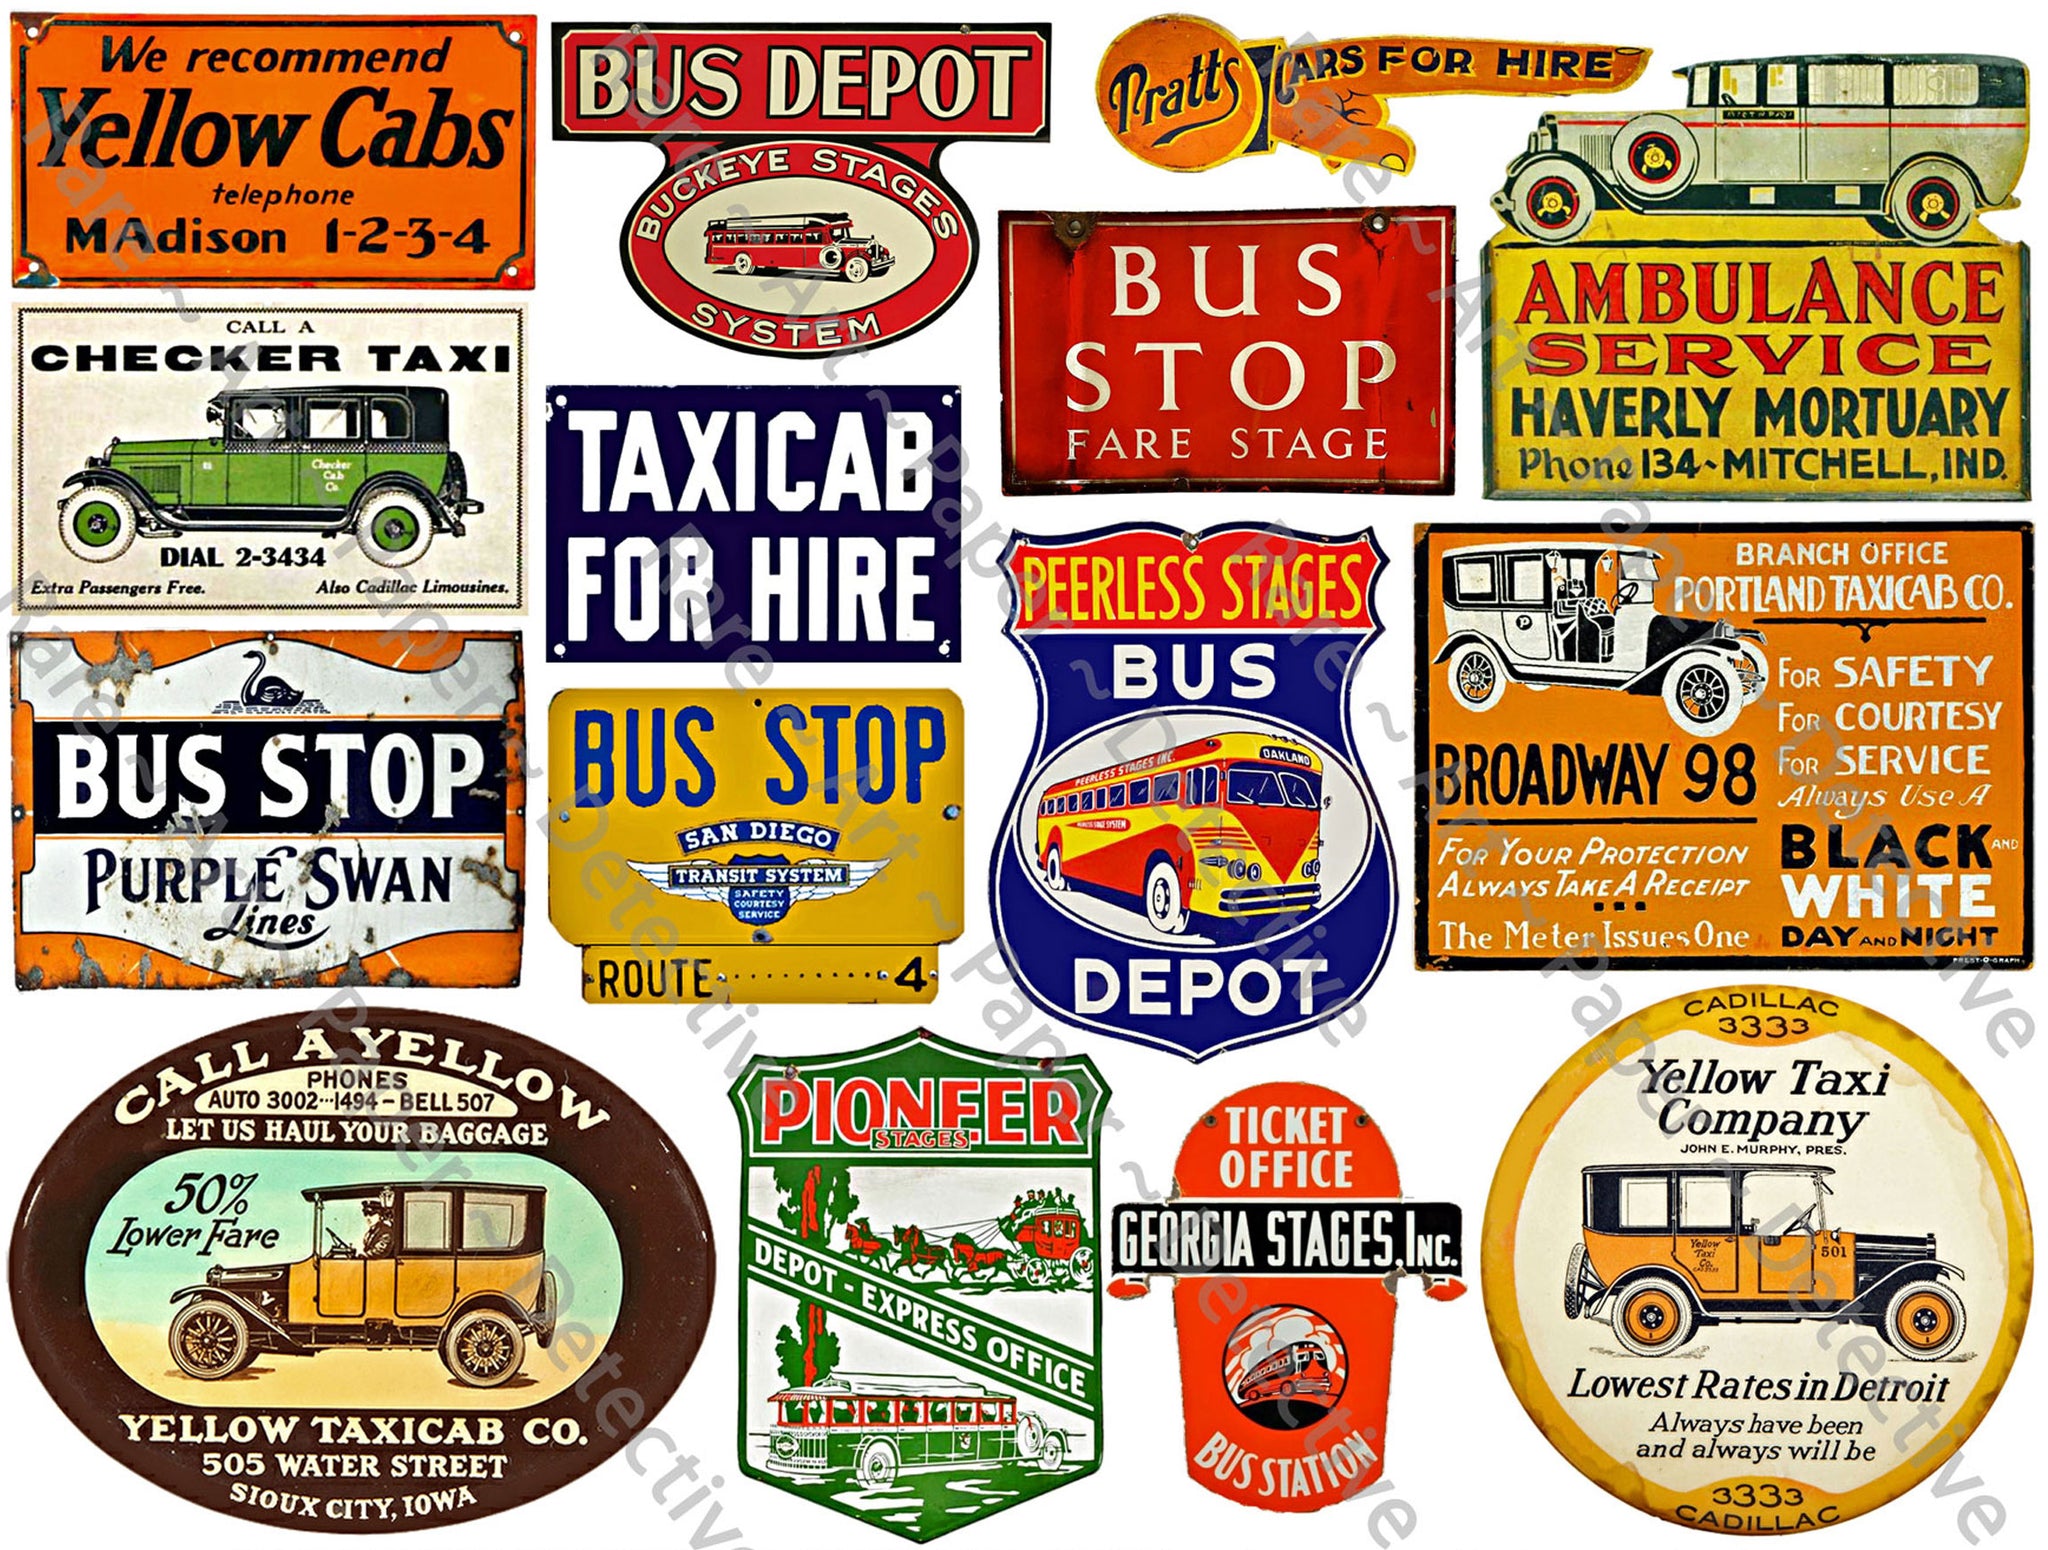 Classic Bus & Taxi Advertising Signs, 15 Travel Stickers Featuring a Vintage Rusty Look, Sheet #743